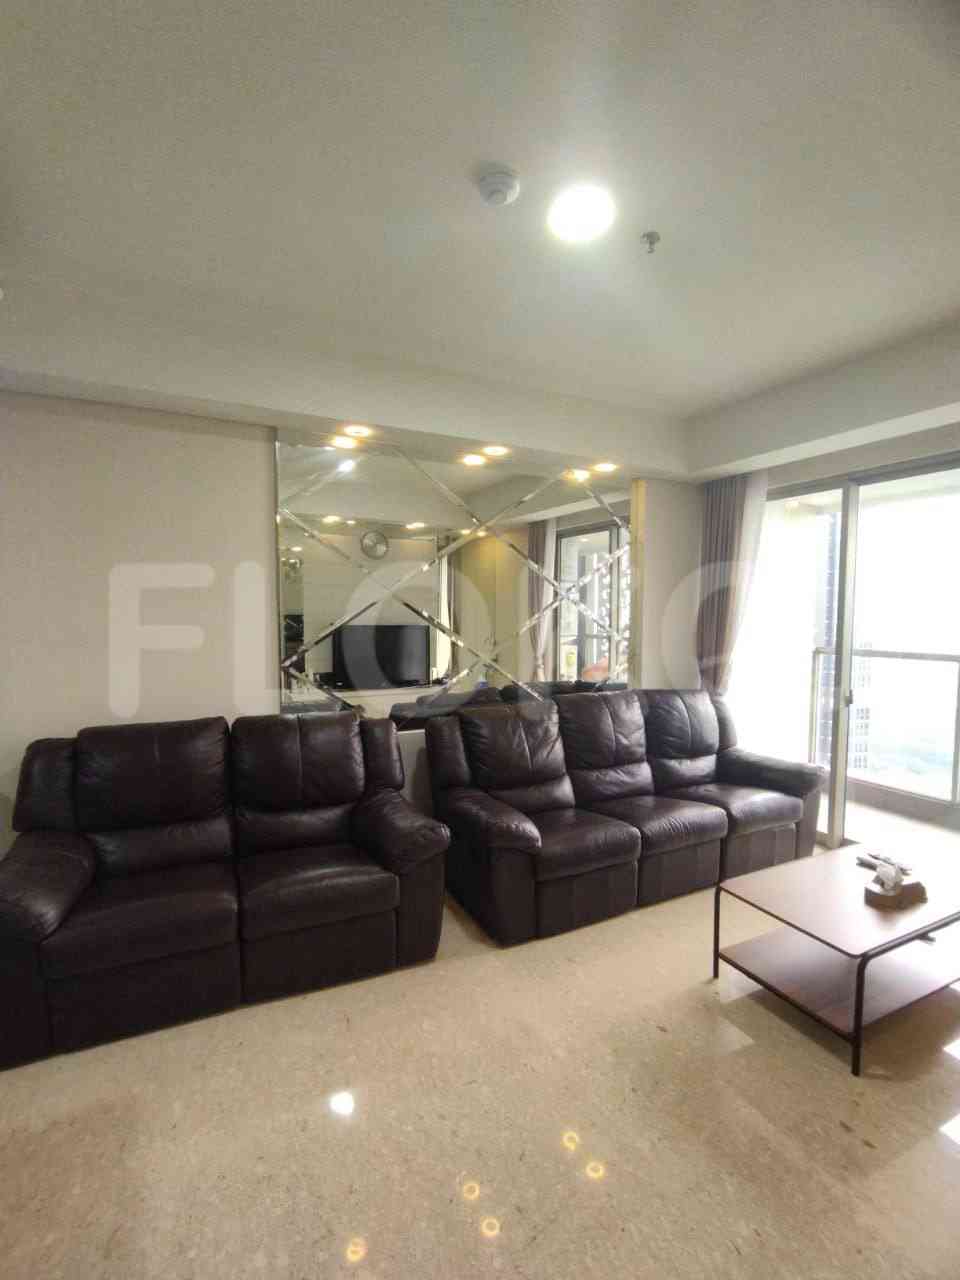 3 Bedroom on 25th Floor for Rent in Gold Coast Apartment - fka079 7